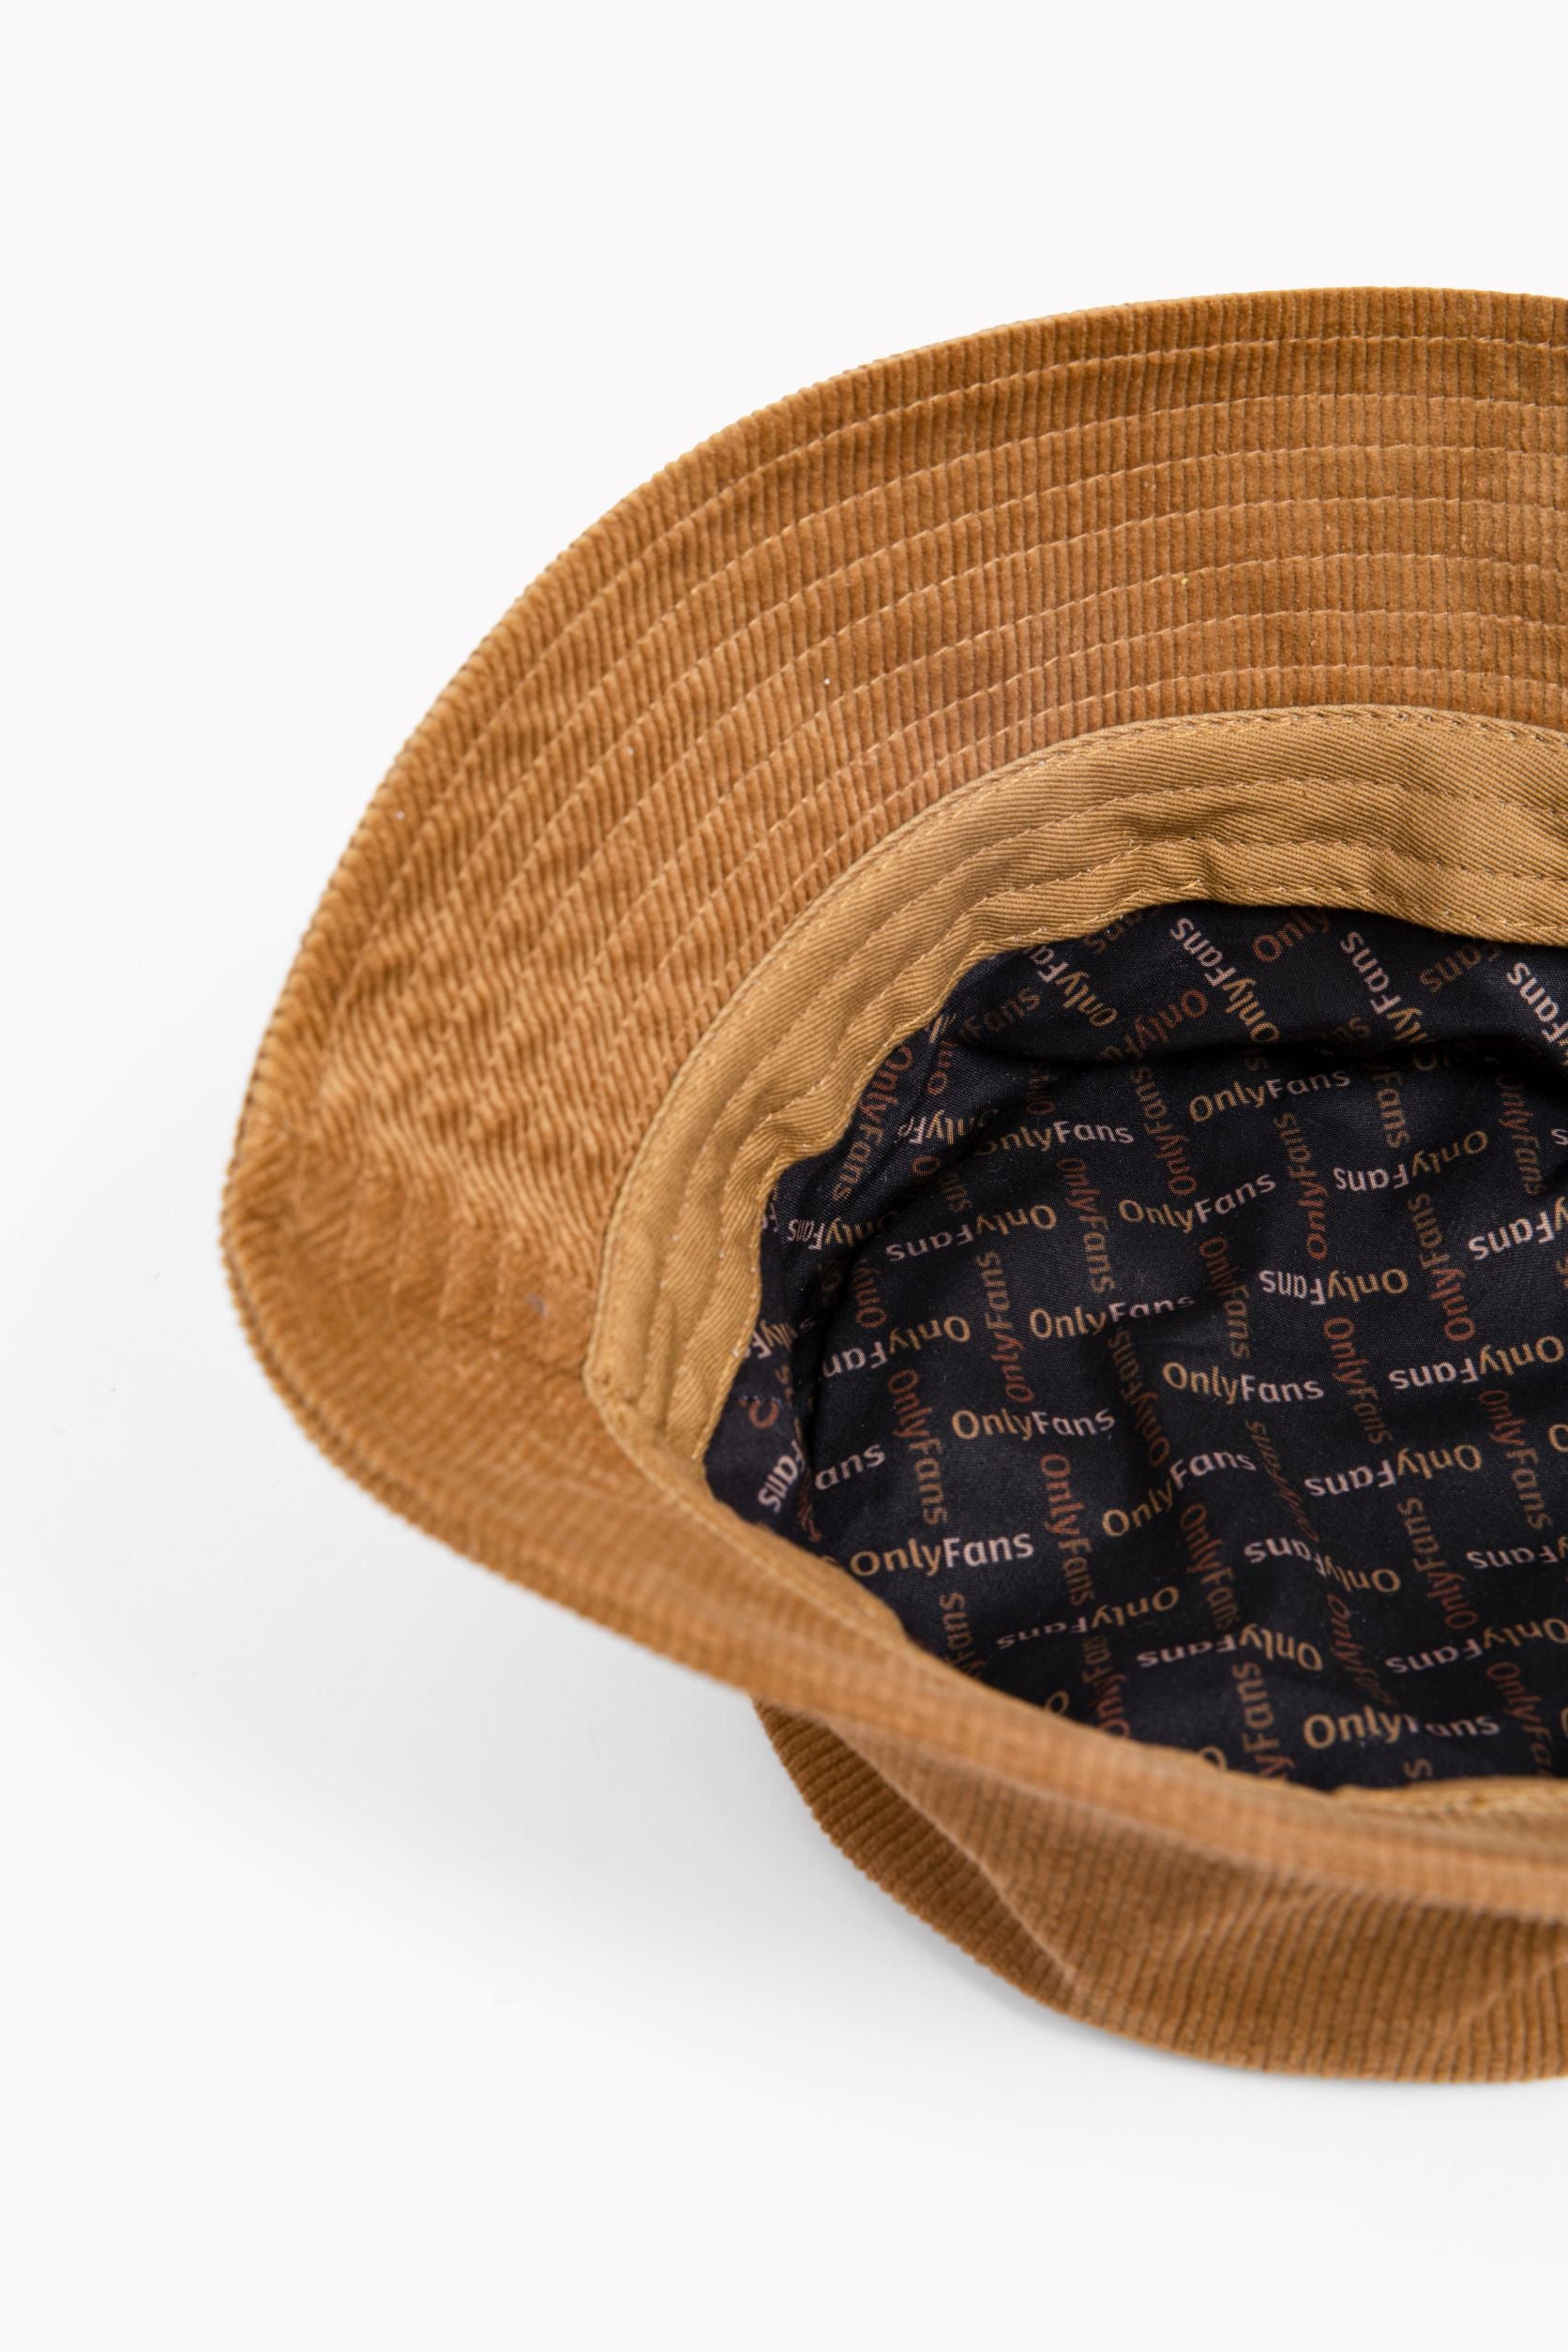 OnlyFans Corduroy Bucket Hat - Brown – OnlyFans Store